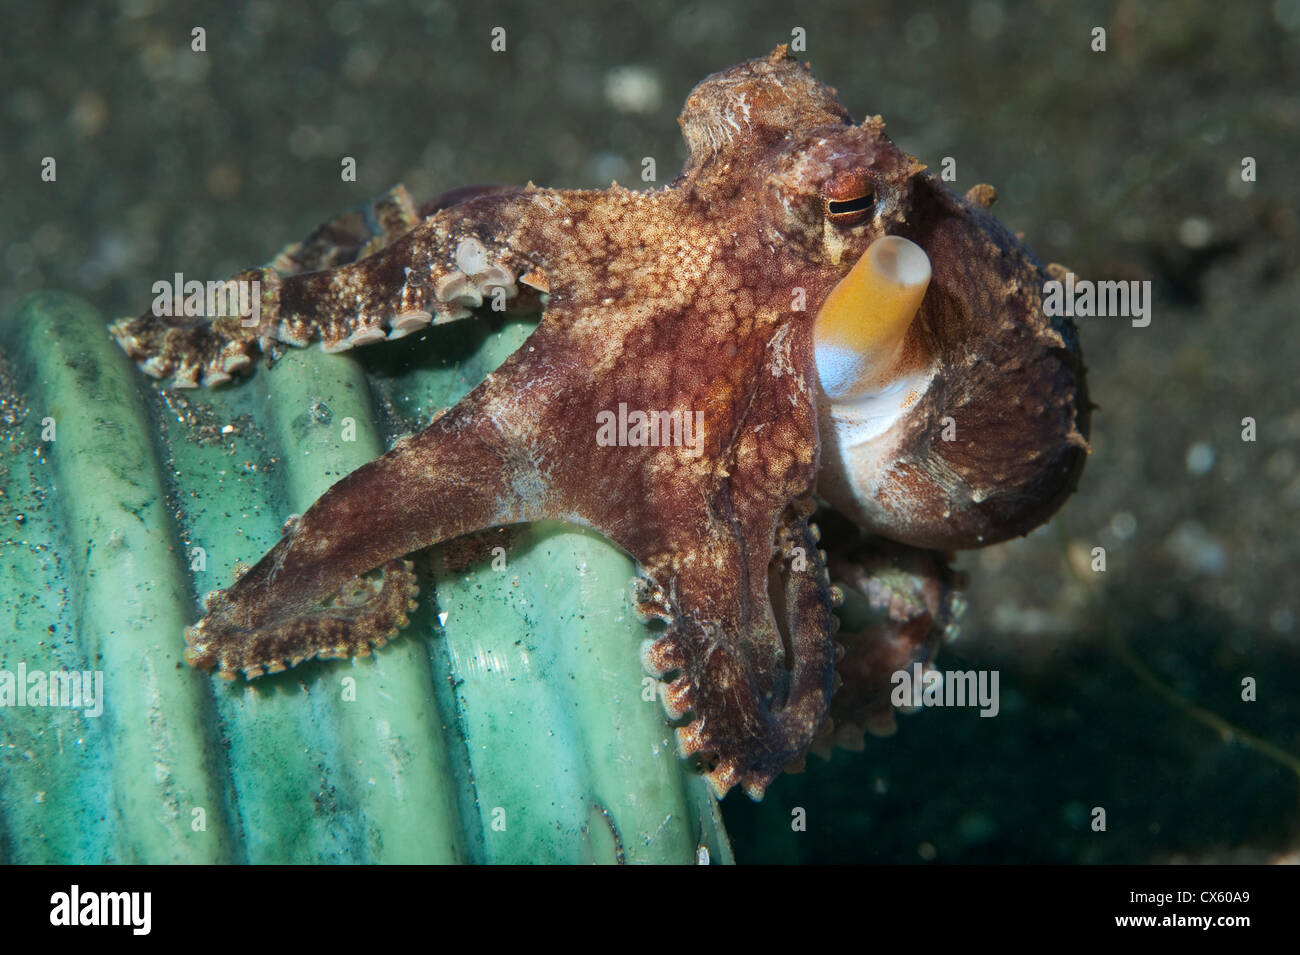 A Coconut Octopus on a pipe in Lembeh Strait, North Sulawesi. Stock Photo